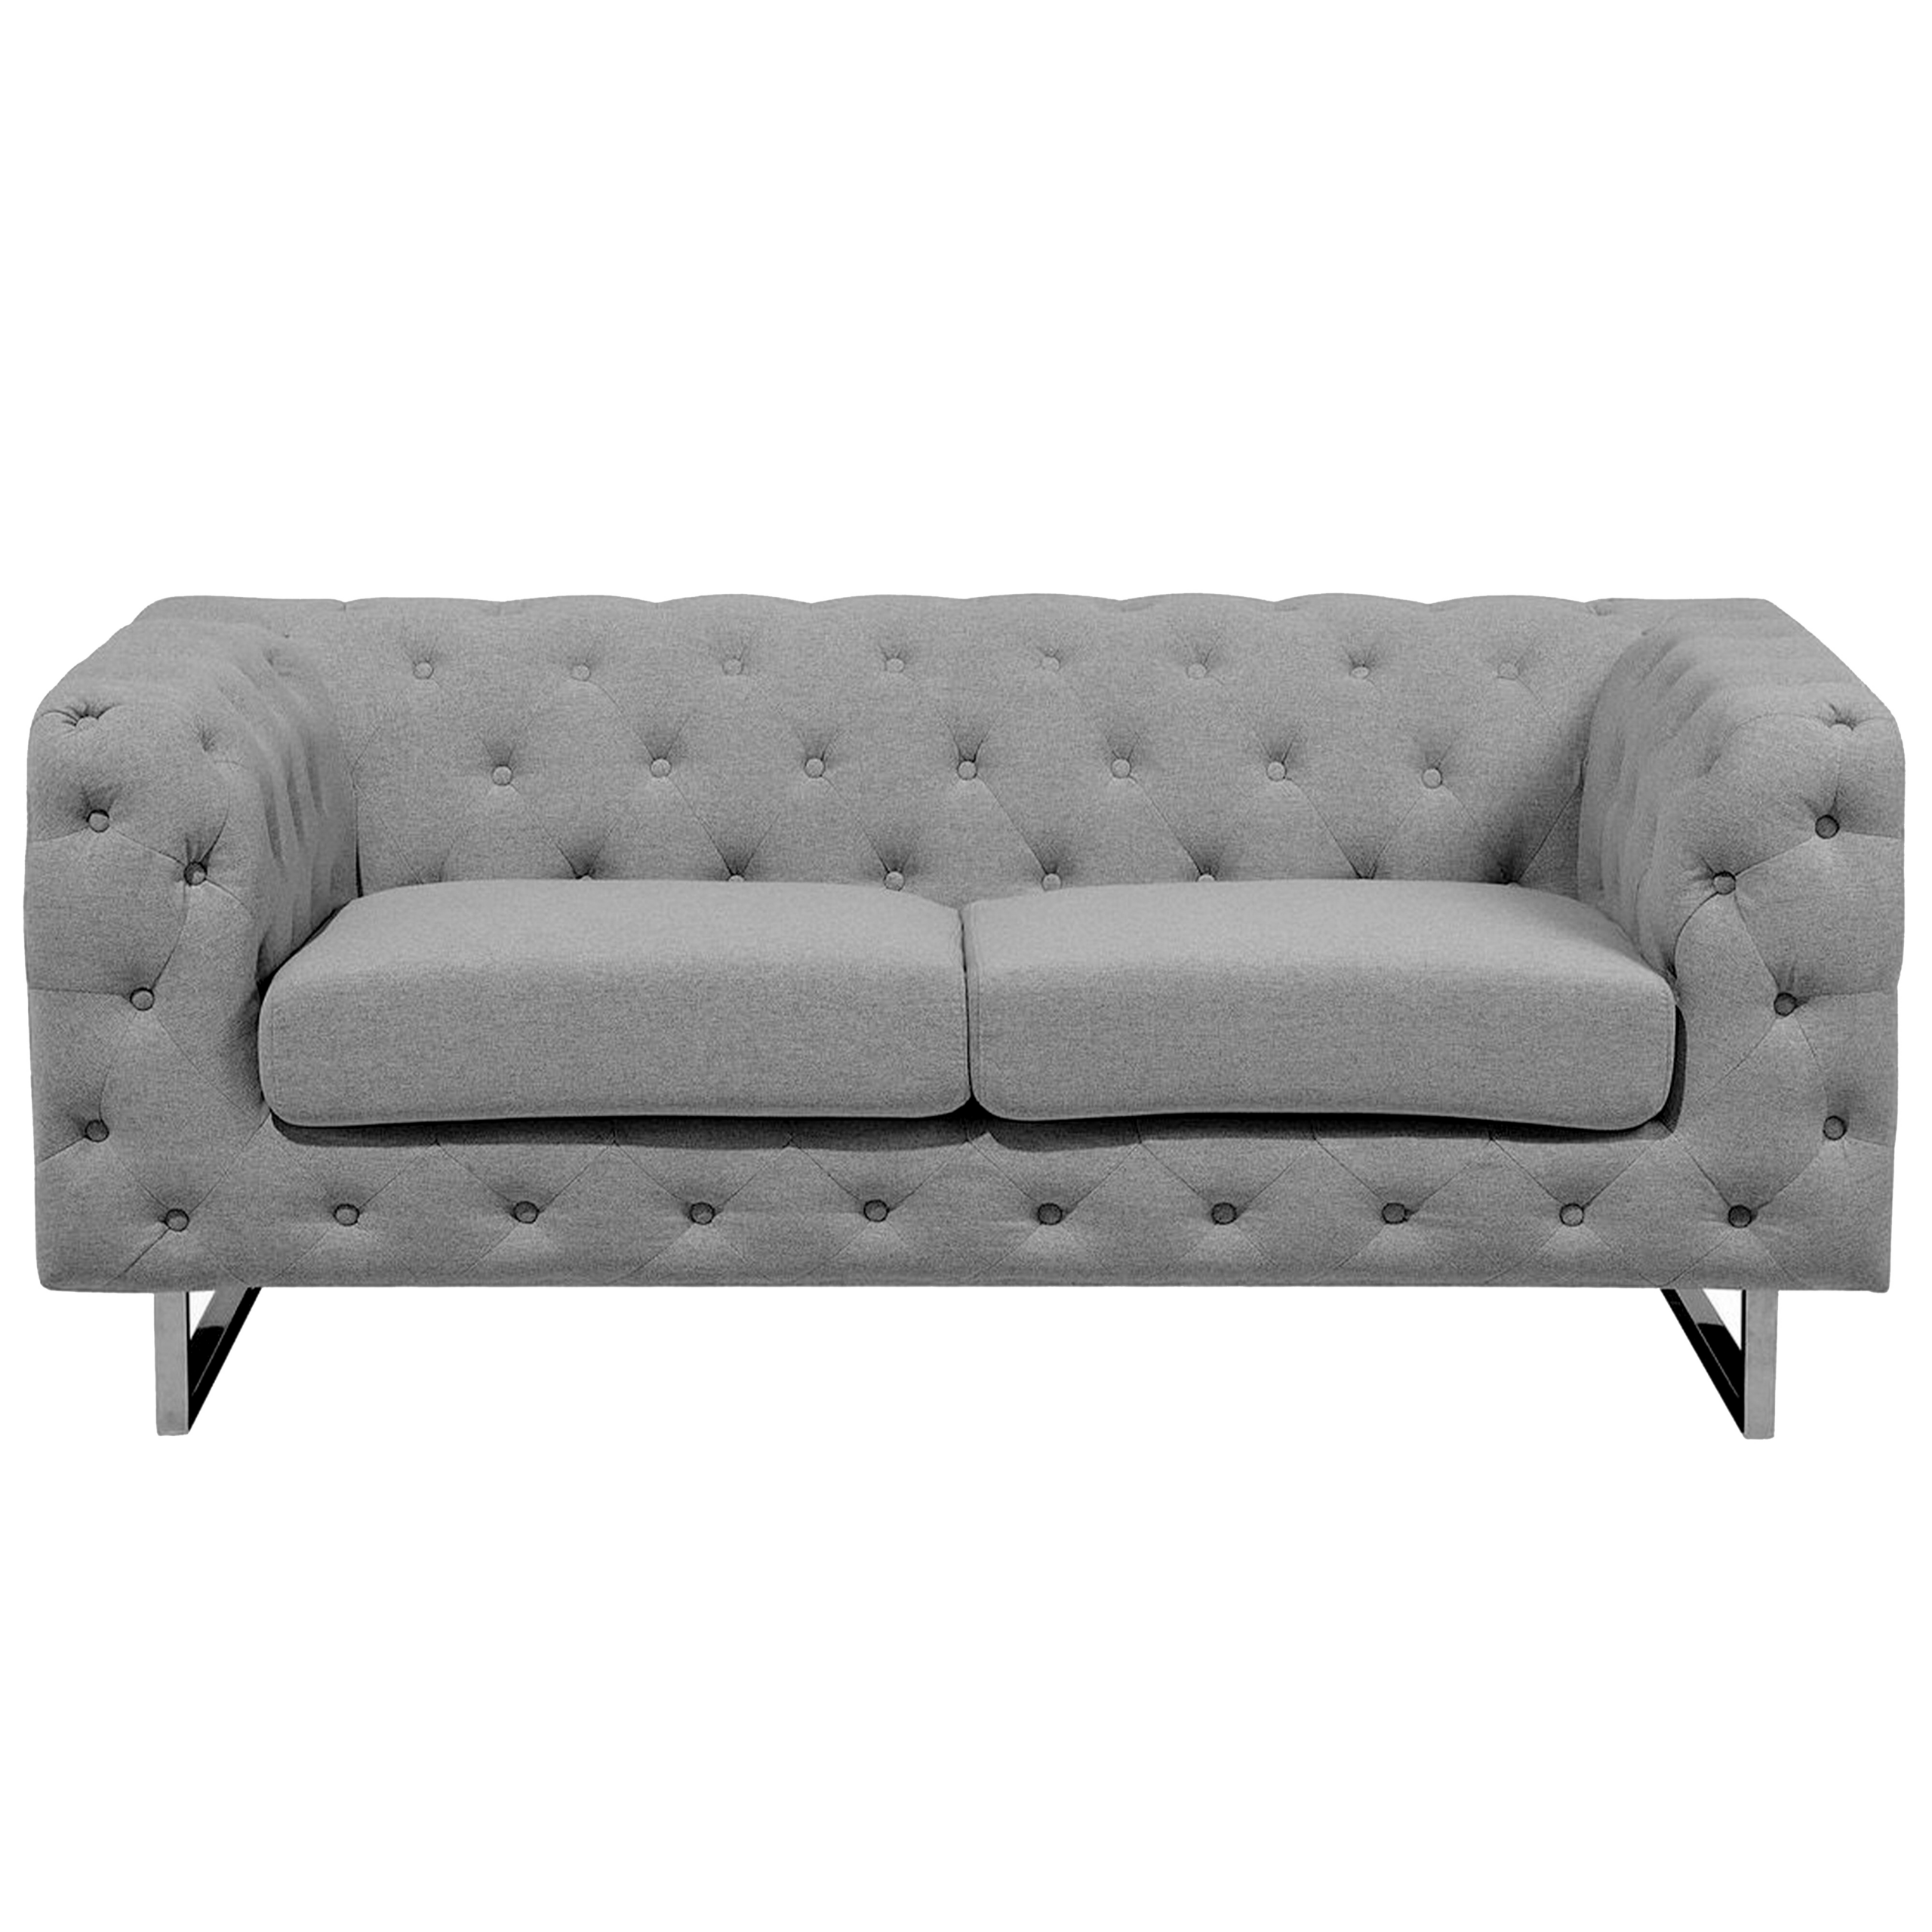 Beliani 2 Seater Chesterfield Sofa Light Grey Button Tufted